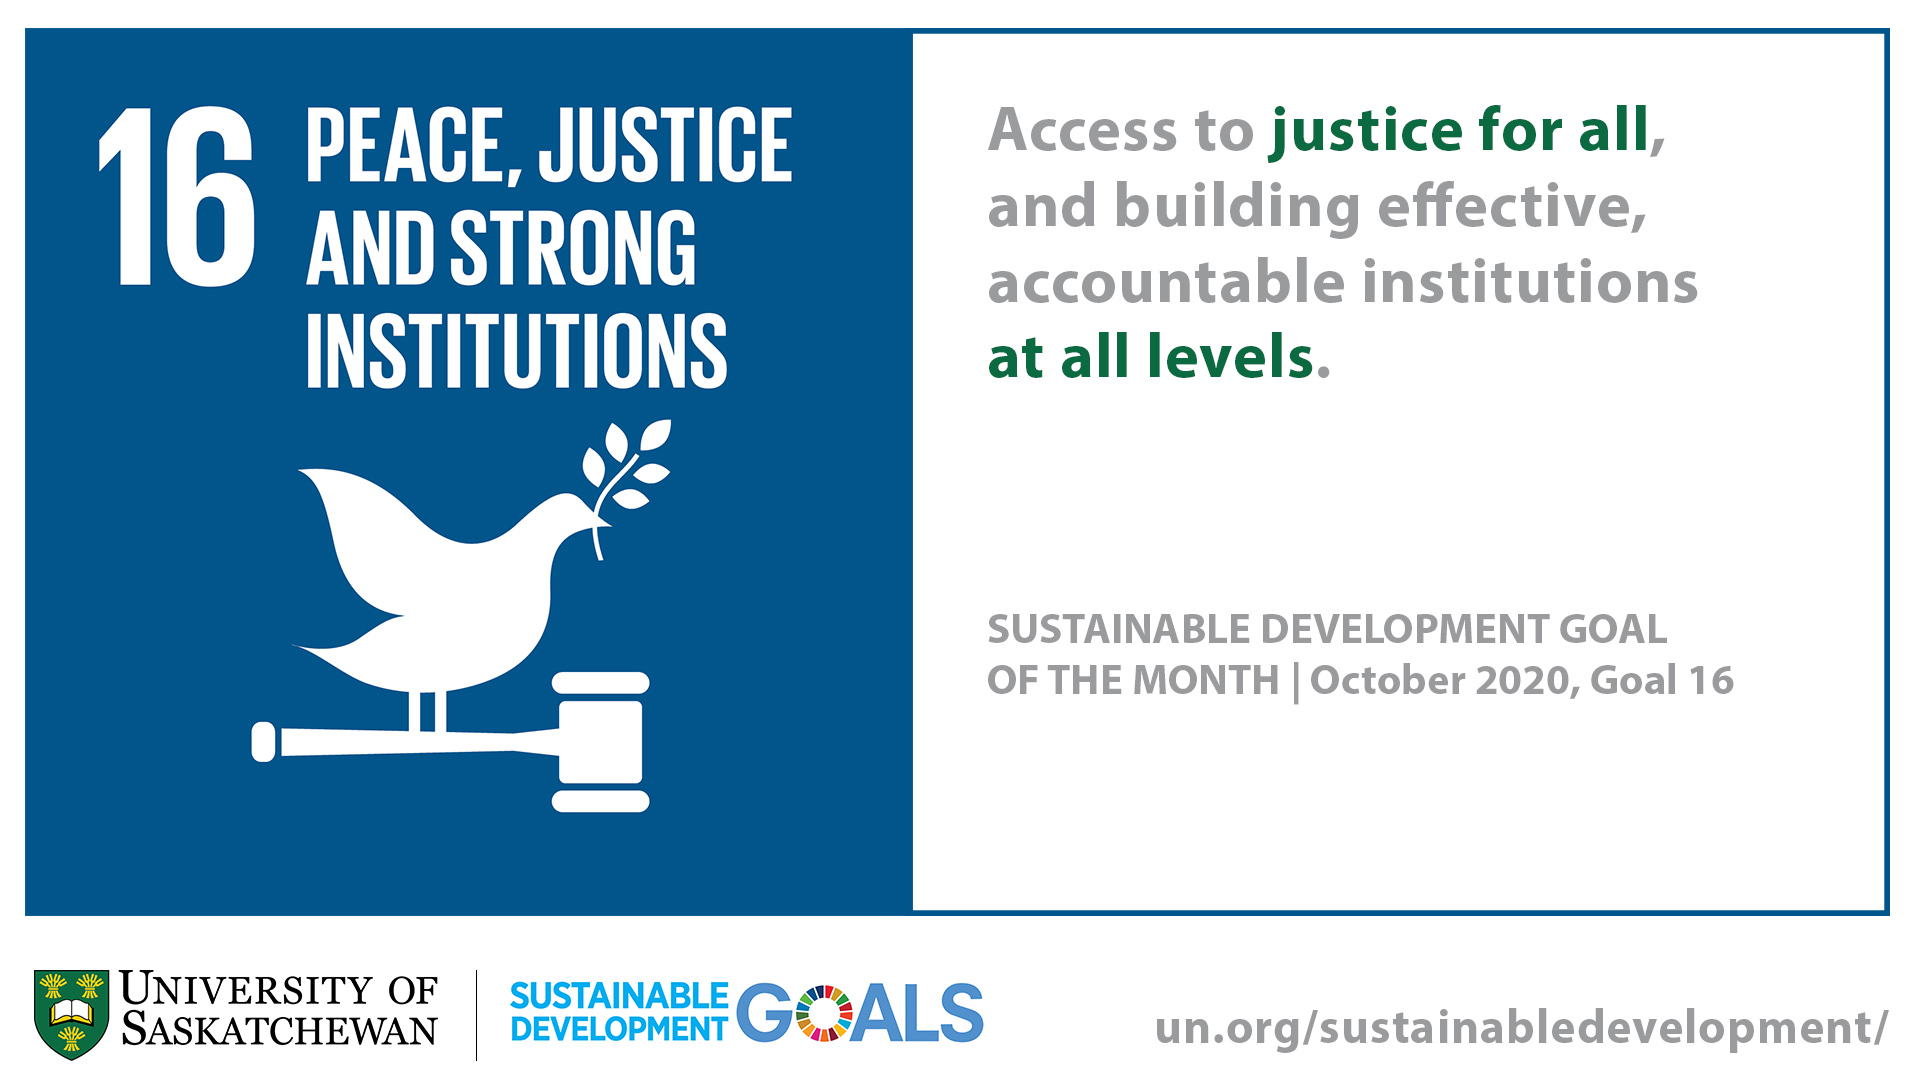 Access to justice for all, and building effective, accountable institutions at all levels.